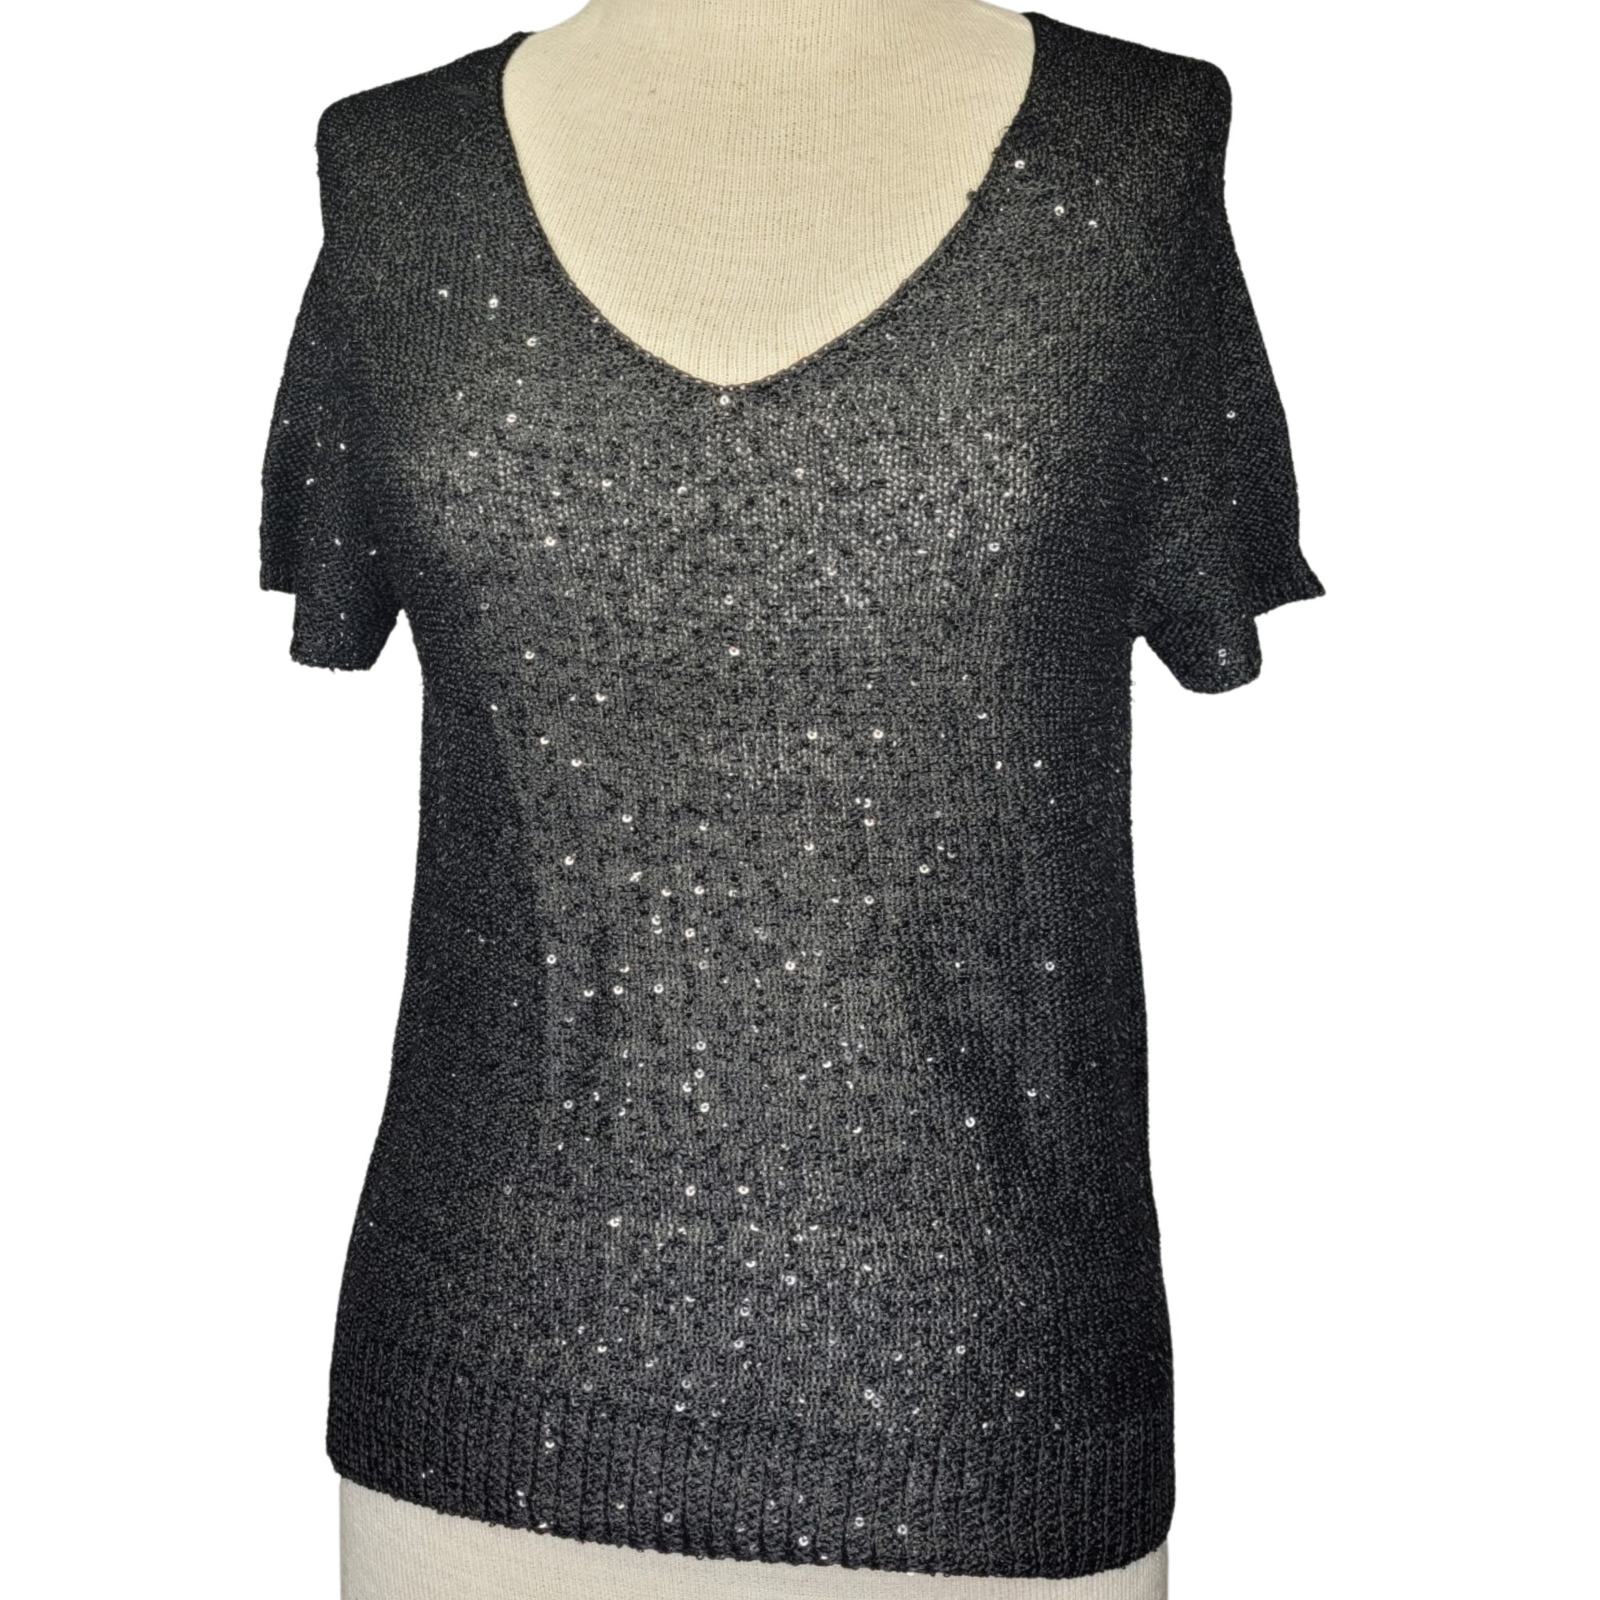 Primary image for Black Short Sleeve Sequin Sweater Size Small 